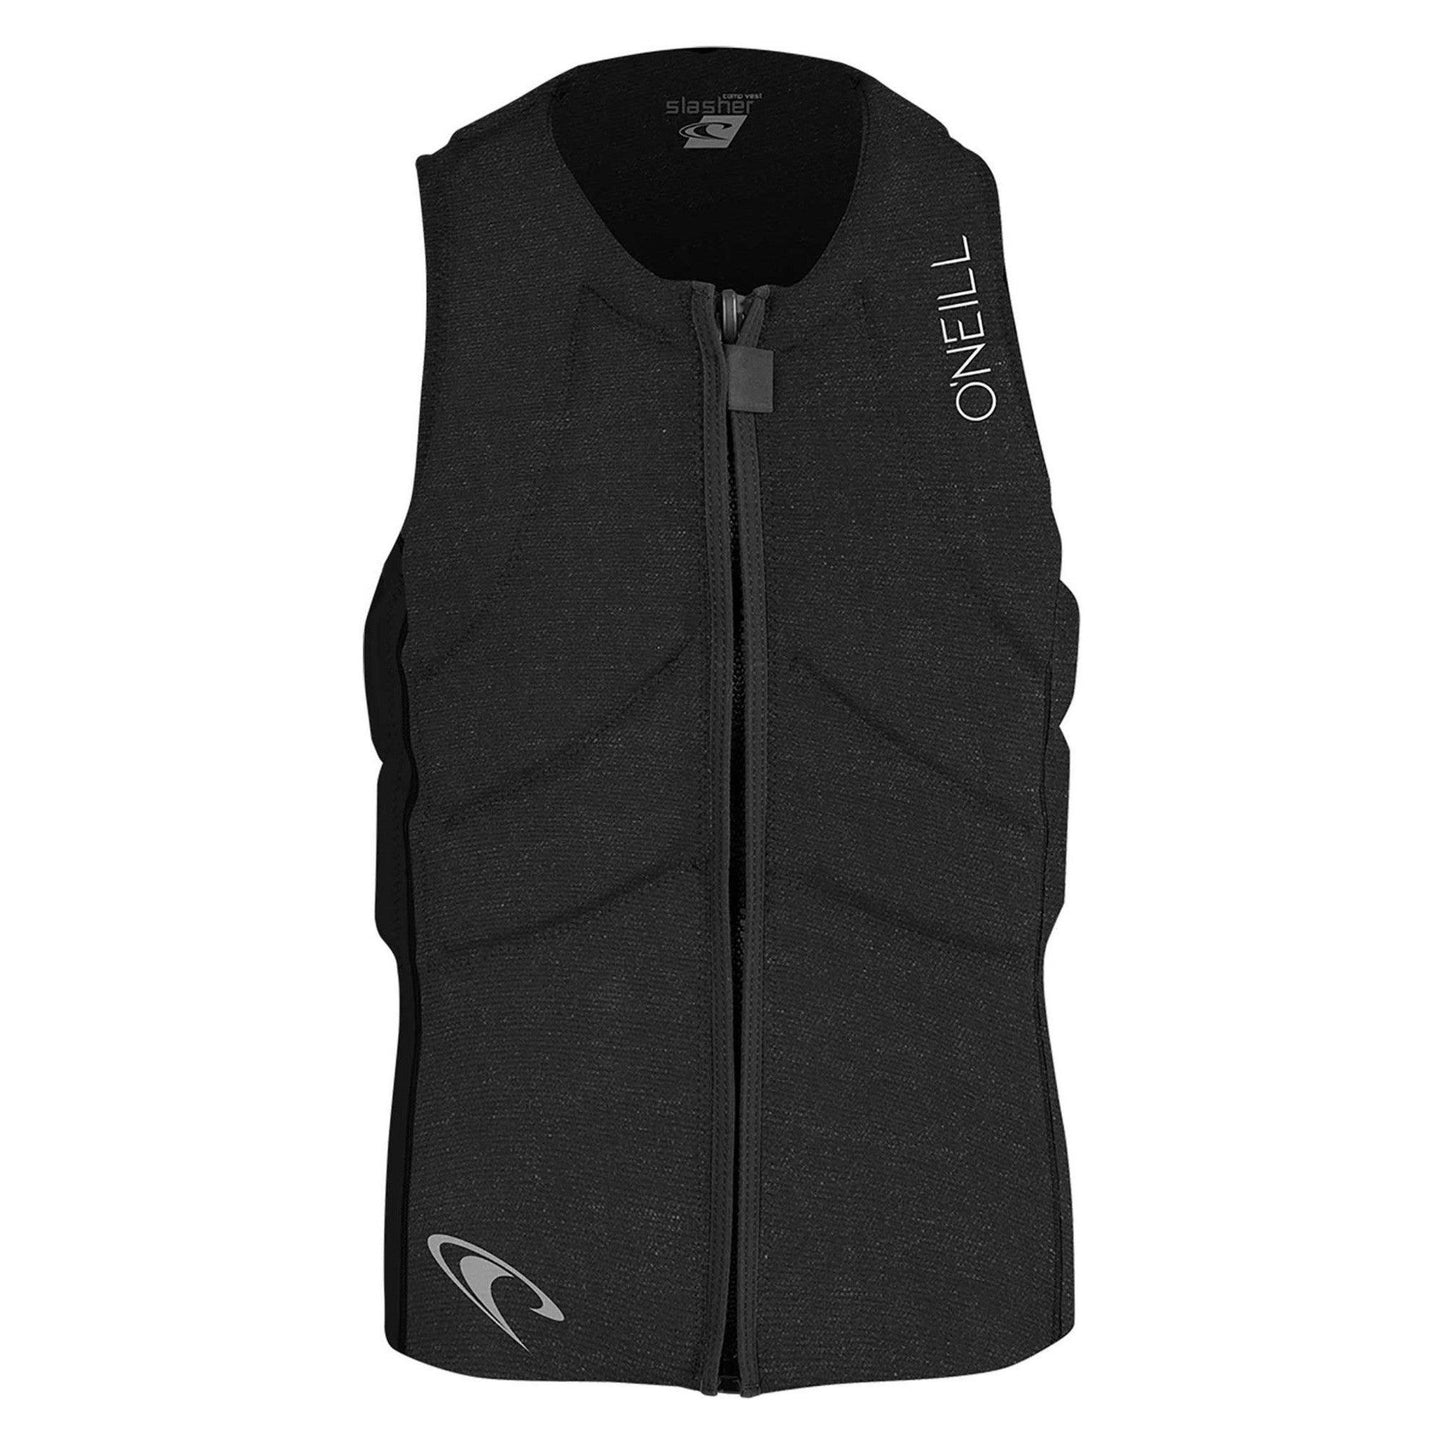 O'Neill Slasher Kite Vest - Poole Harbour Watersports